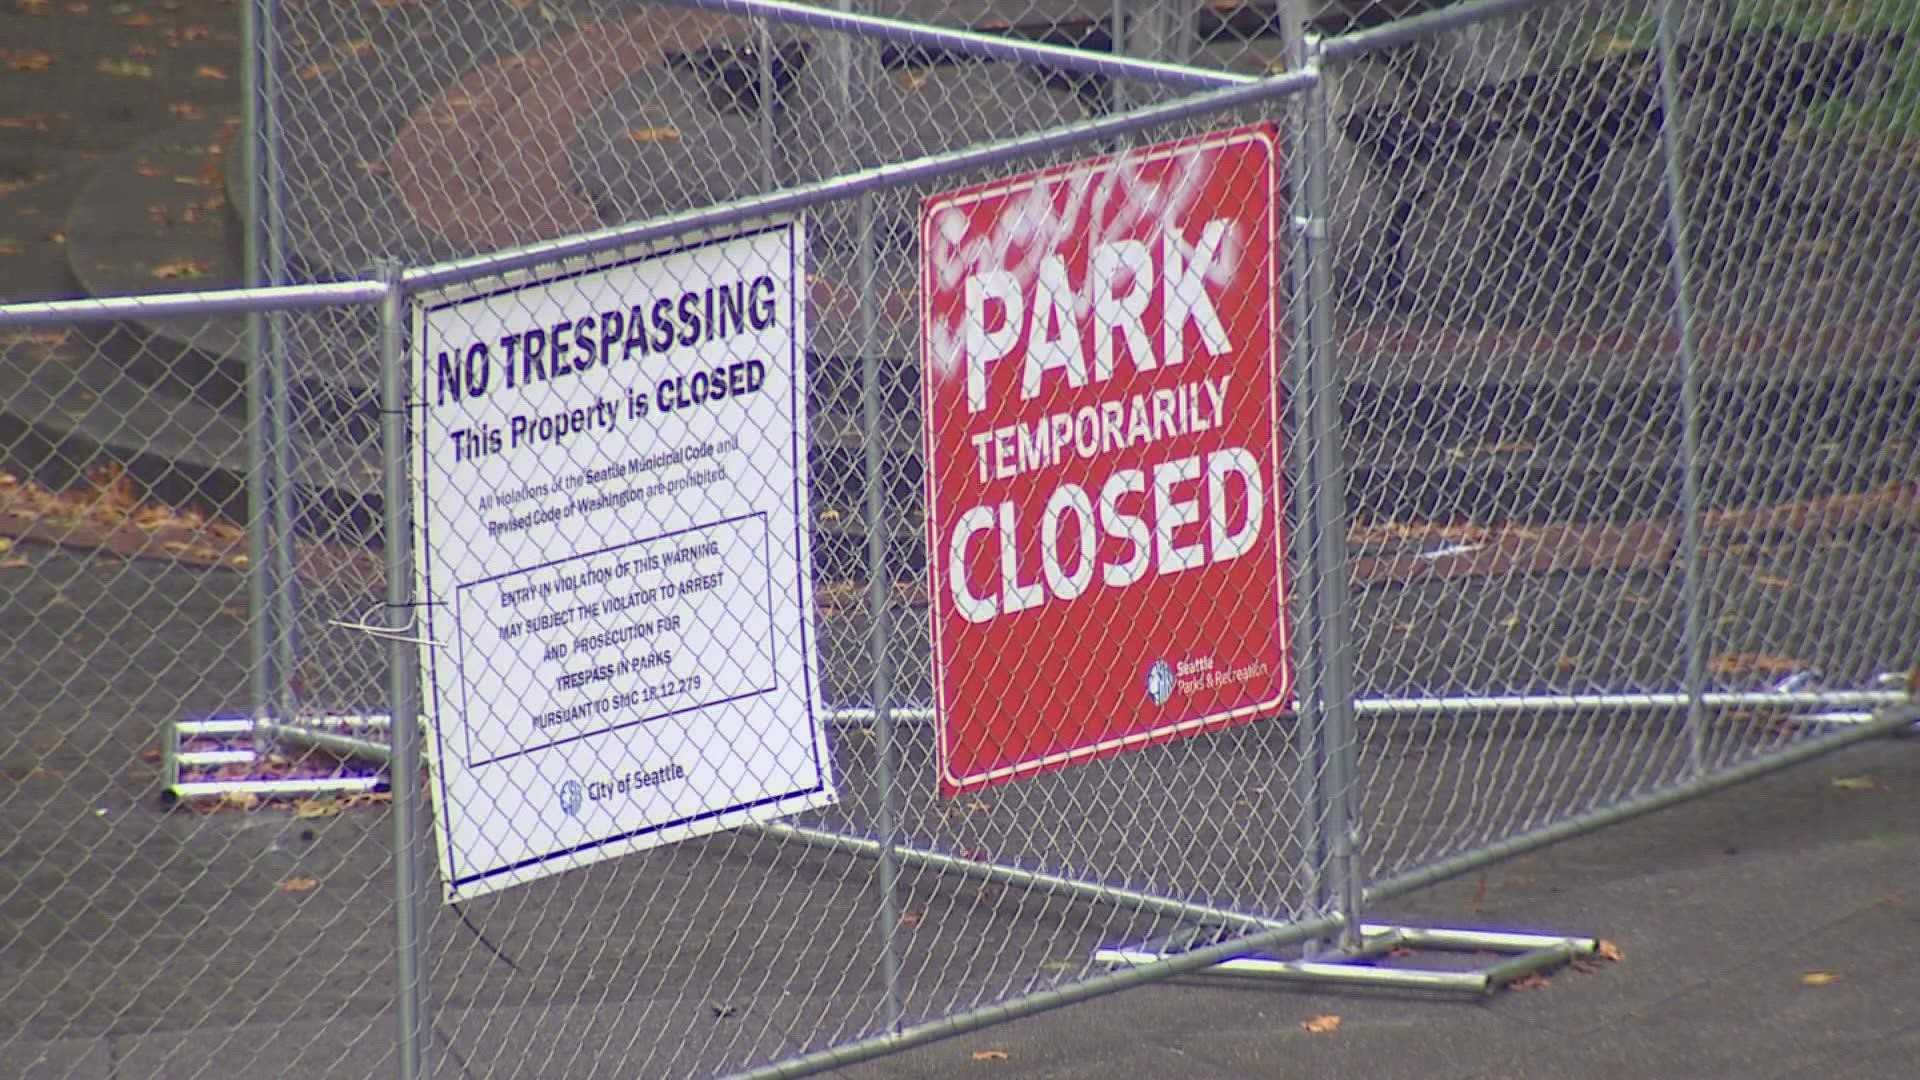 Executive Constantine and Mayor Durkan announce land swap for City Hall Park